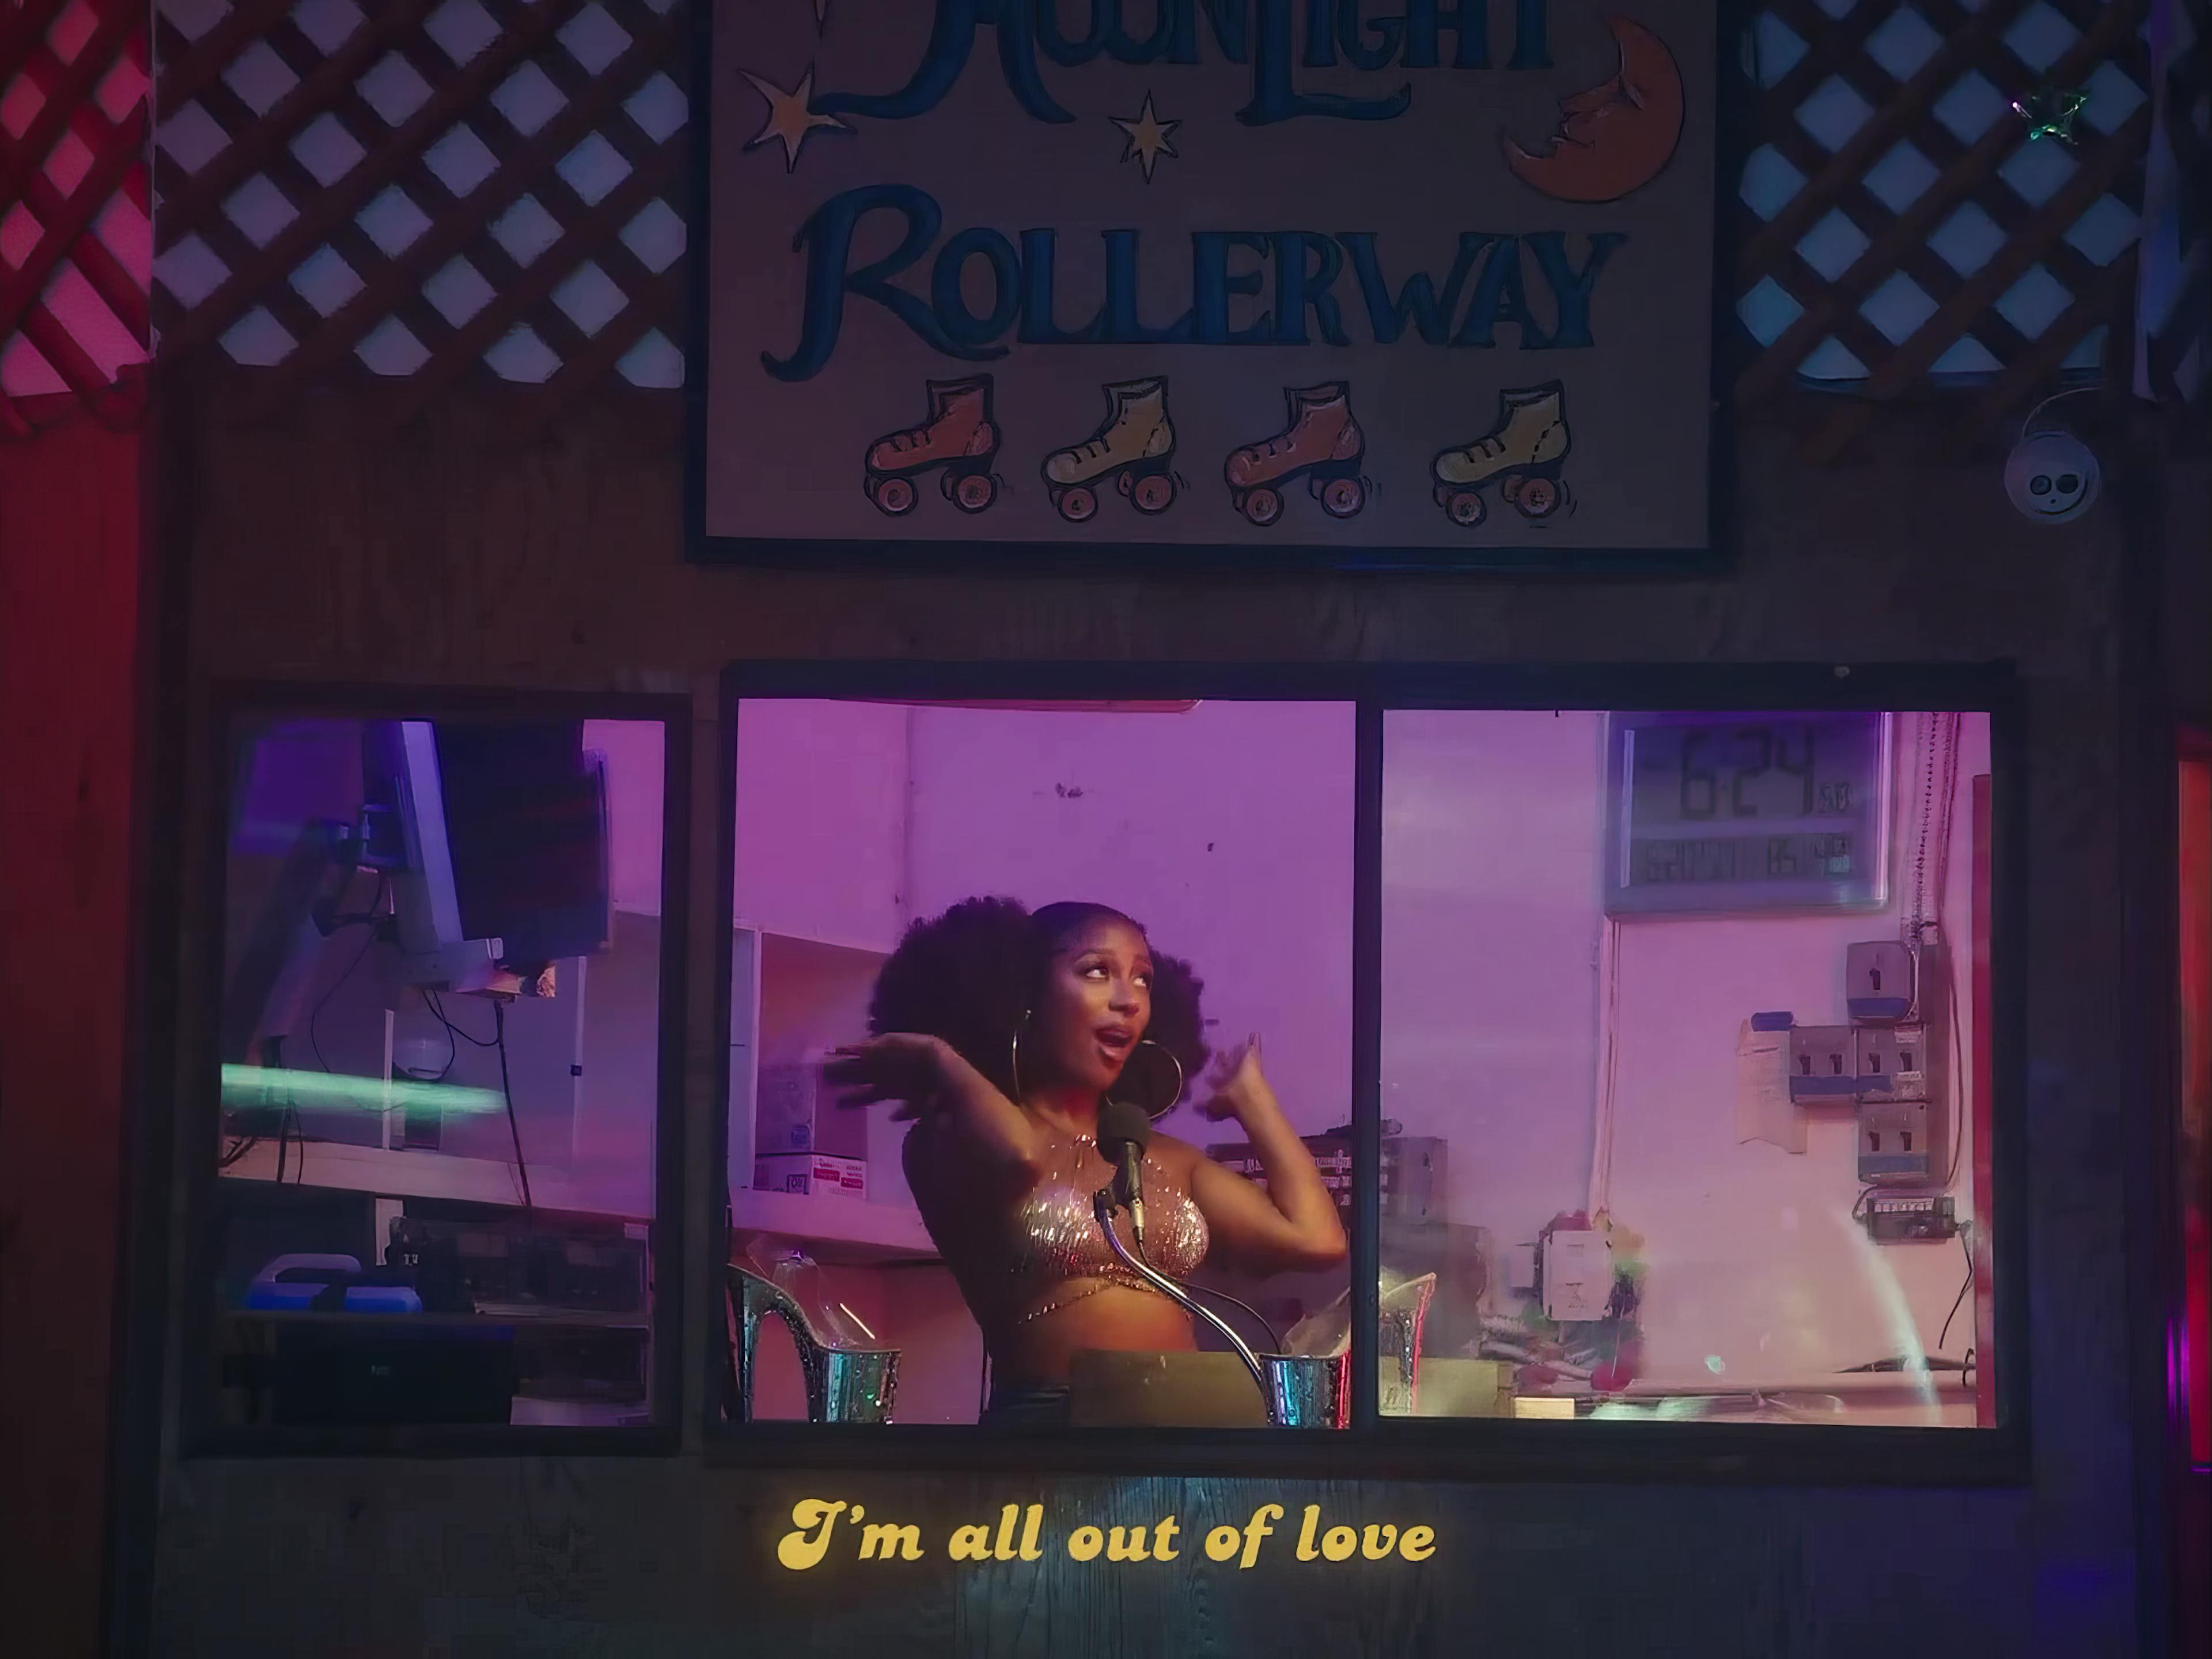 A woman in a sparkling outfit performs in a roller rink DJ booth with neon lights and a 'Moonlight Rollerway' sign above, evoking a lively, retro atmosphere.